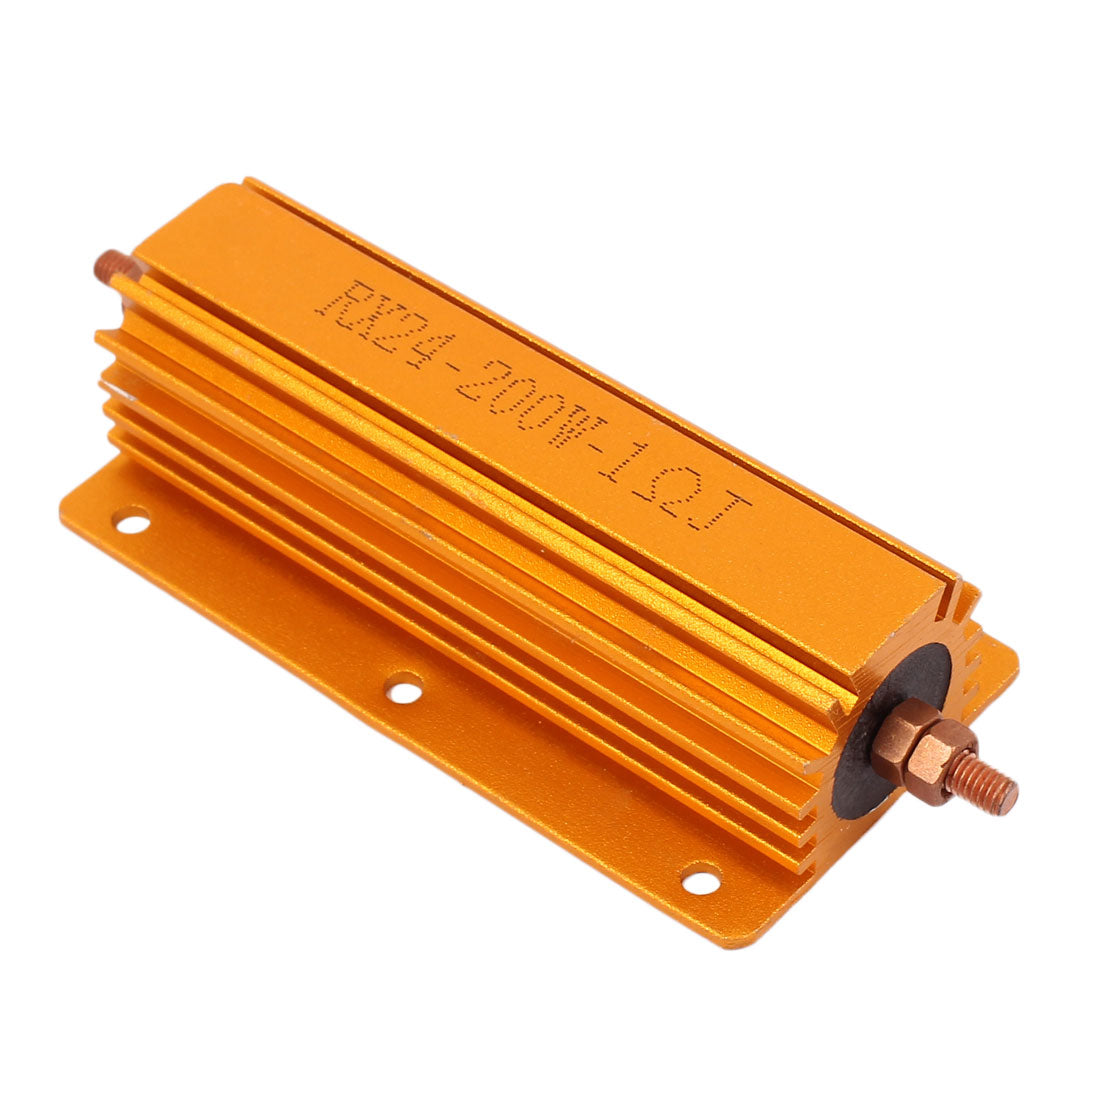 uxcell Uxcell Gold Tone Axial Lead Aluminum Housed RX24 Fixed Resistor 200W 1 Ohm